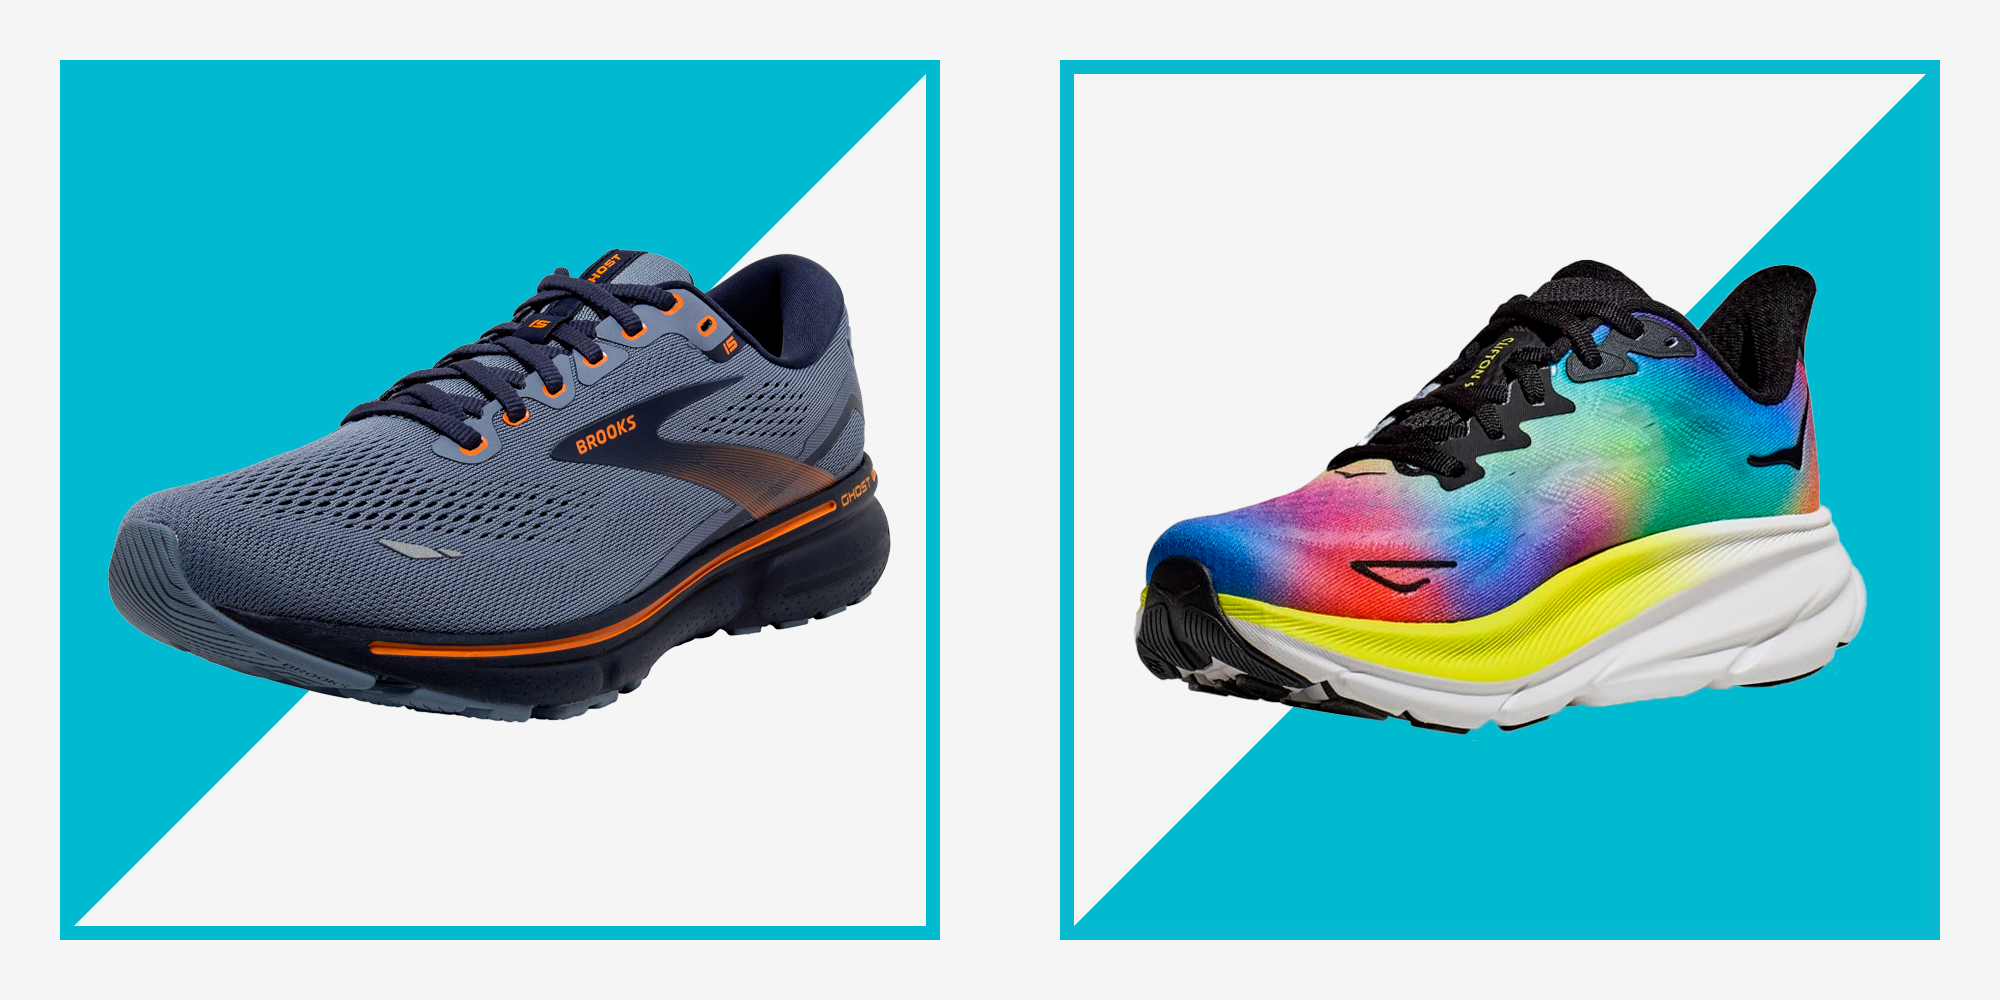 New to Running? Check Out These Great Running Shoes for Beginners